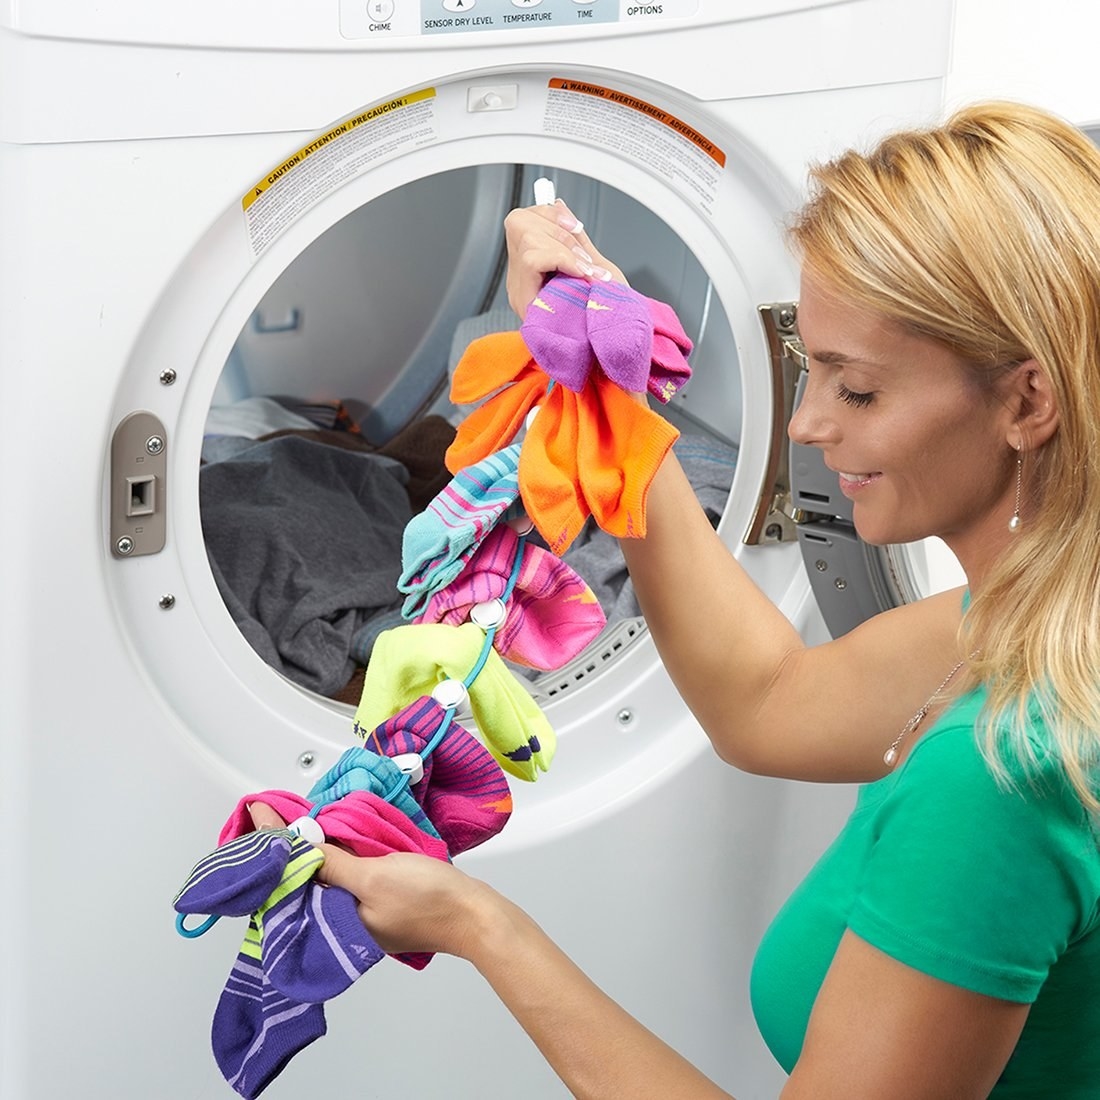 A person in front of a washing machine and holding a long cable cord with loops that have multiple pairs of socks hanging from them